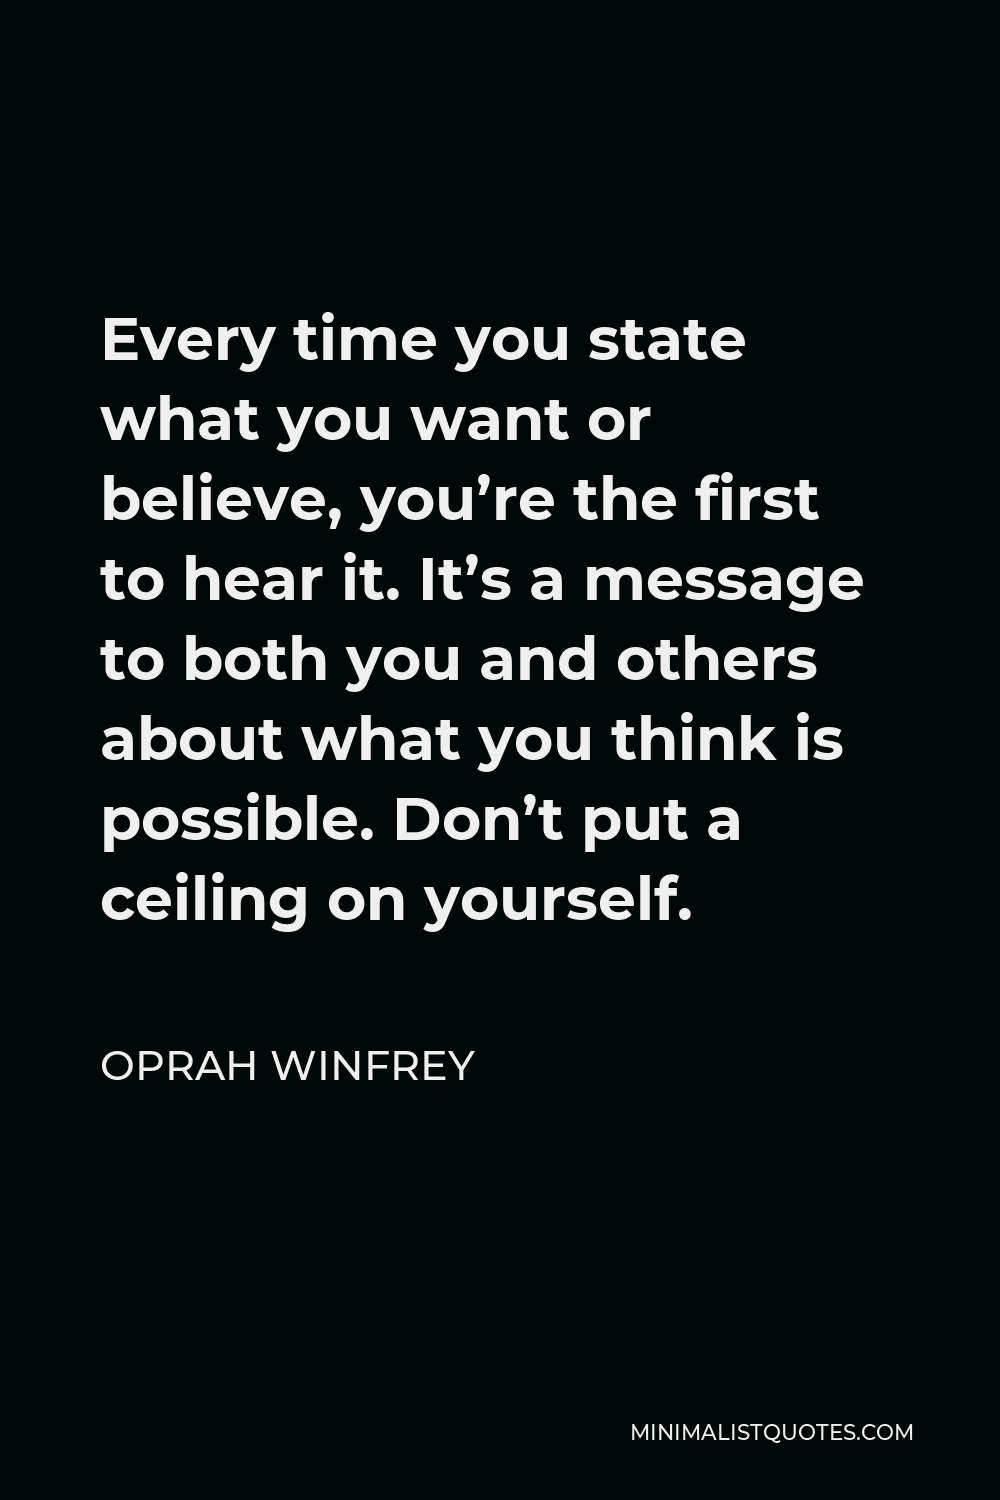 Oprah Winfrey Quote - Every time you state what you want or believe, you’re the first to hear it. It’s a message to both you and others about what you think is possible. Don’t put a ceiling on yourself.